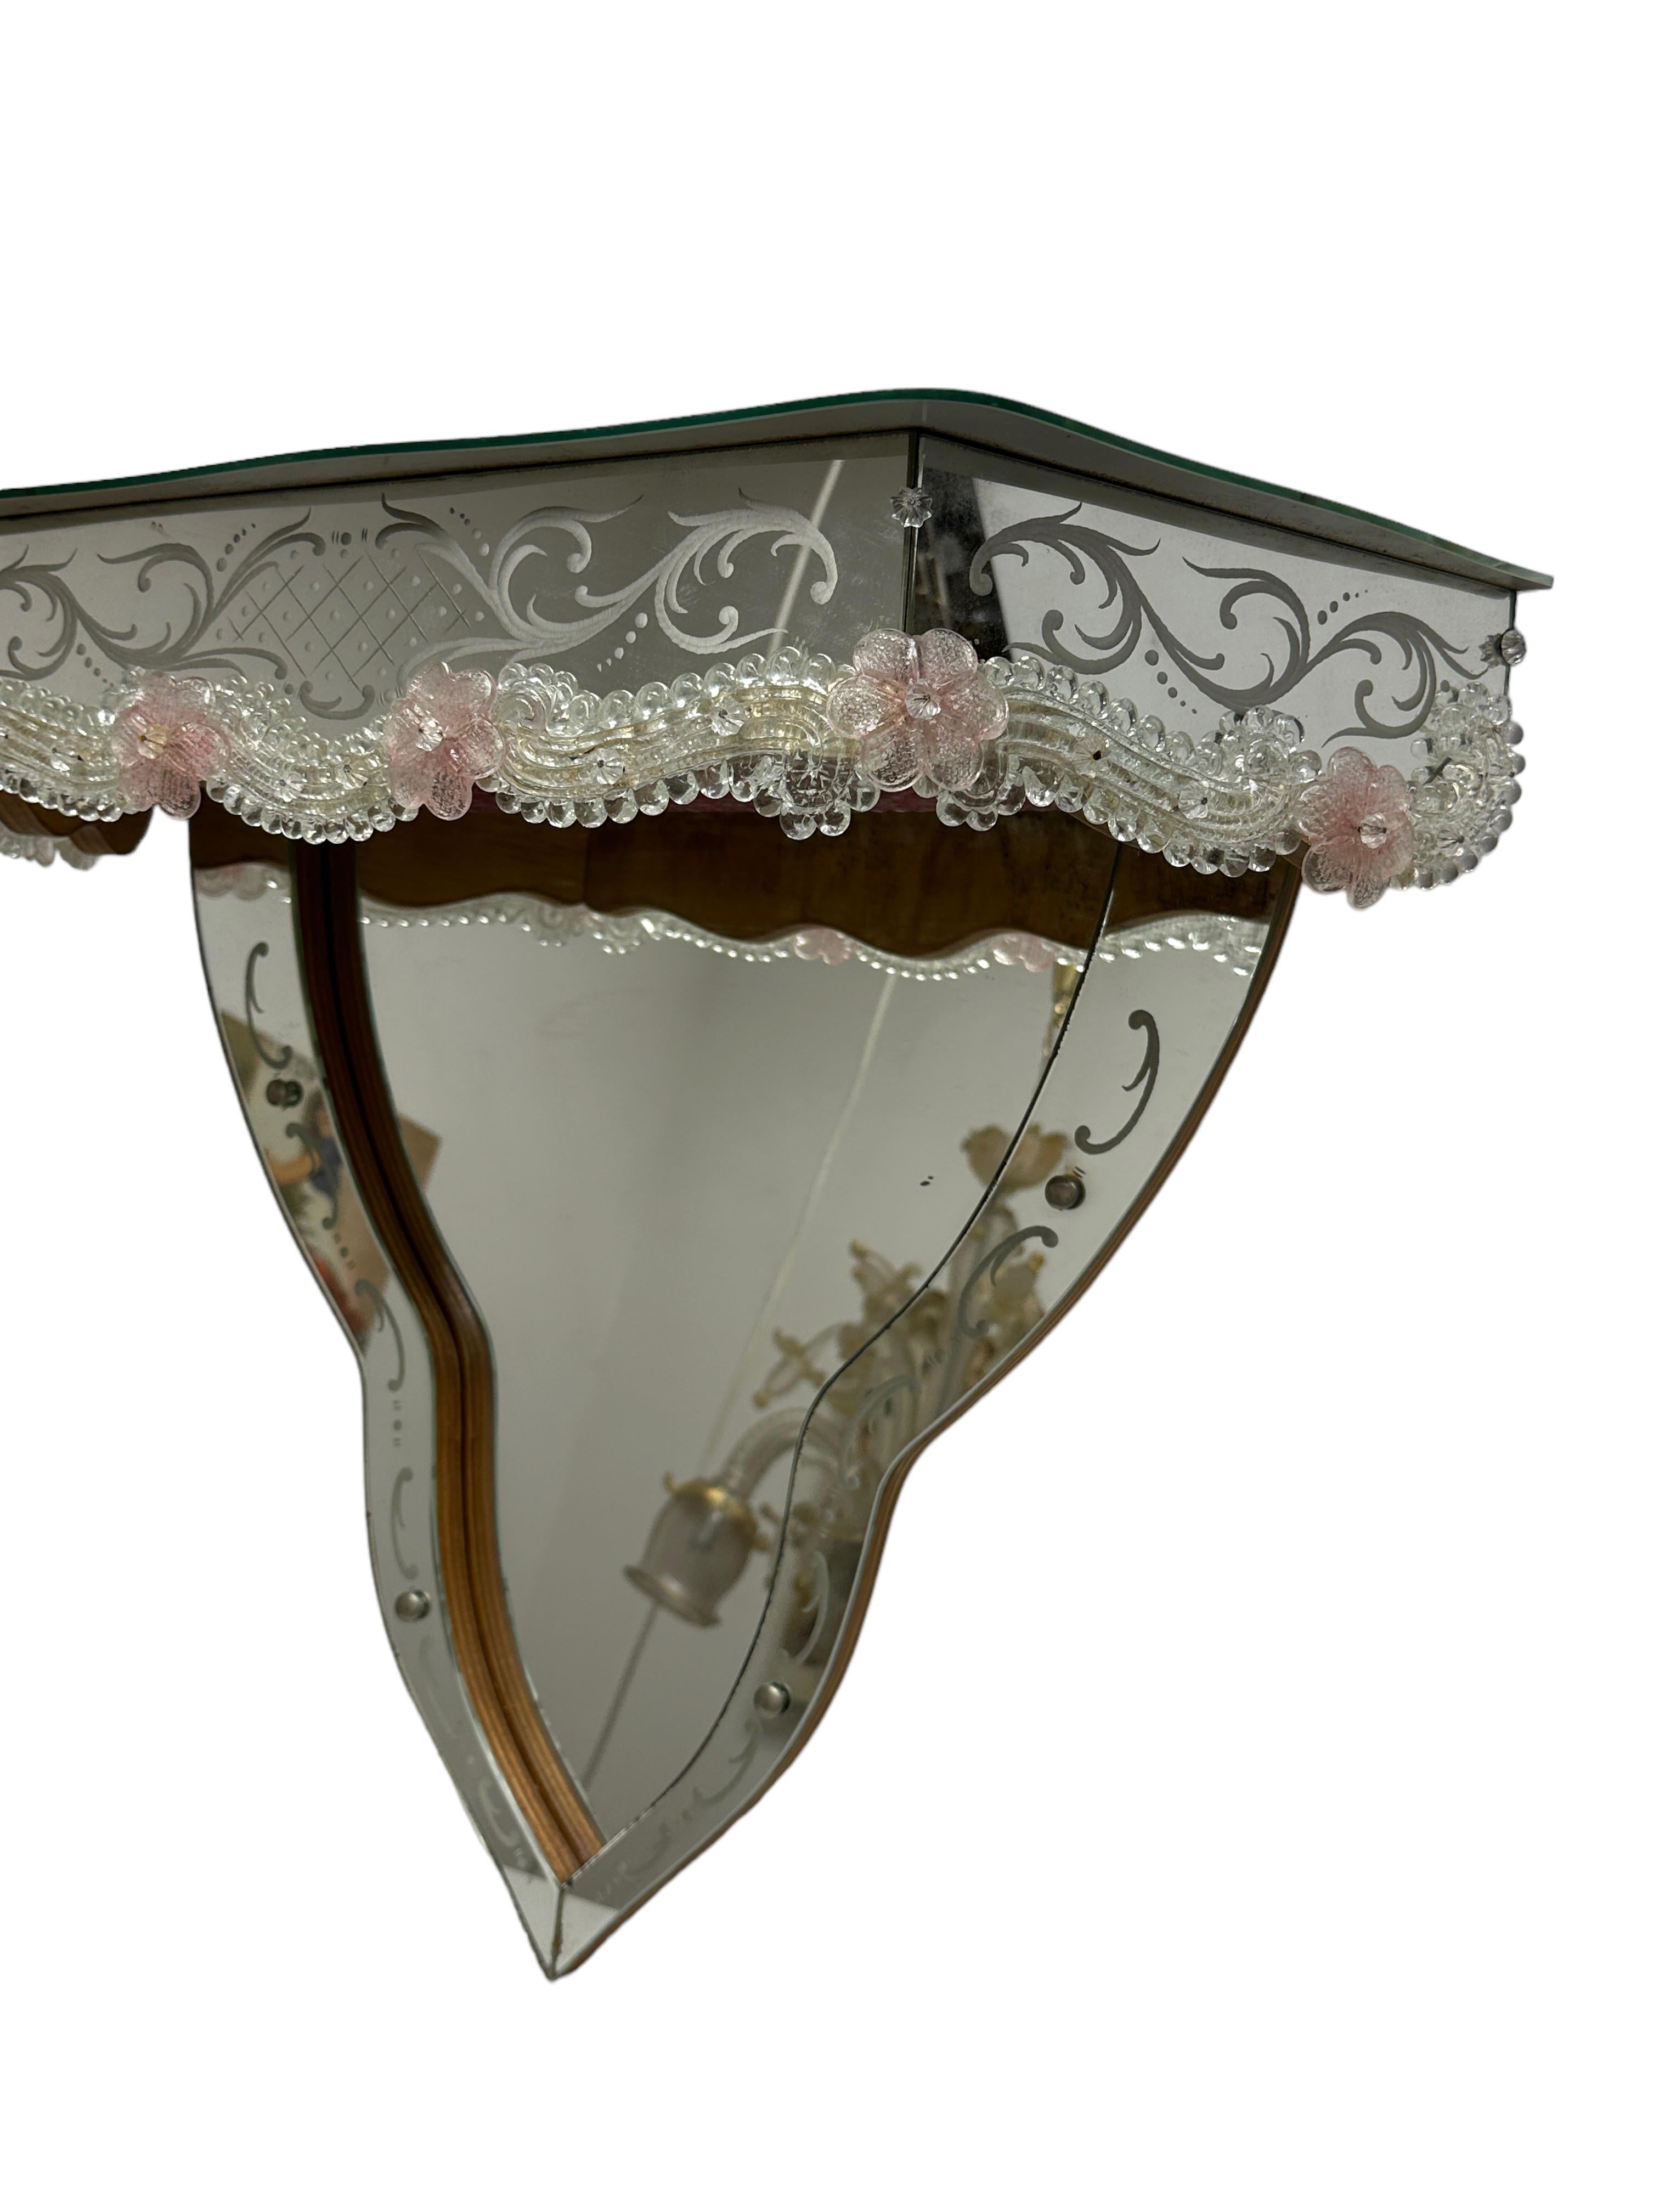 Mid-20th Century Stunning Murano Glass Mirrored Wall Console Pink Flowers, 1950s Italy